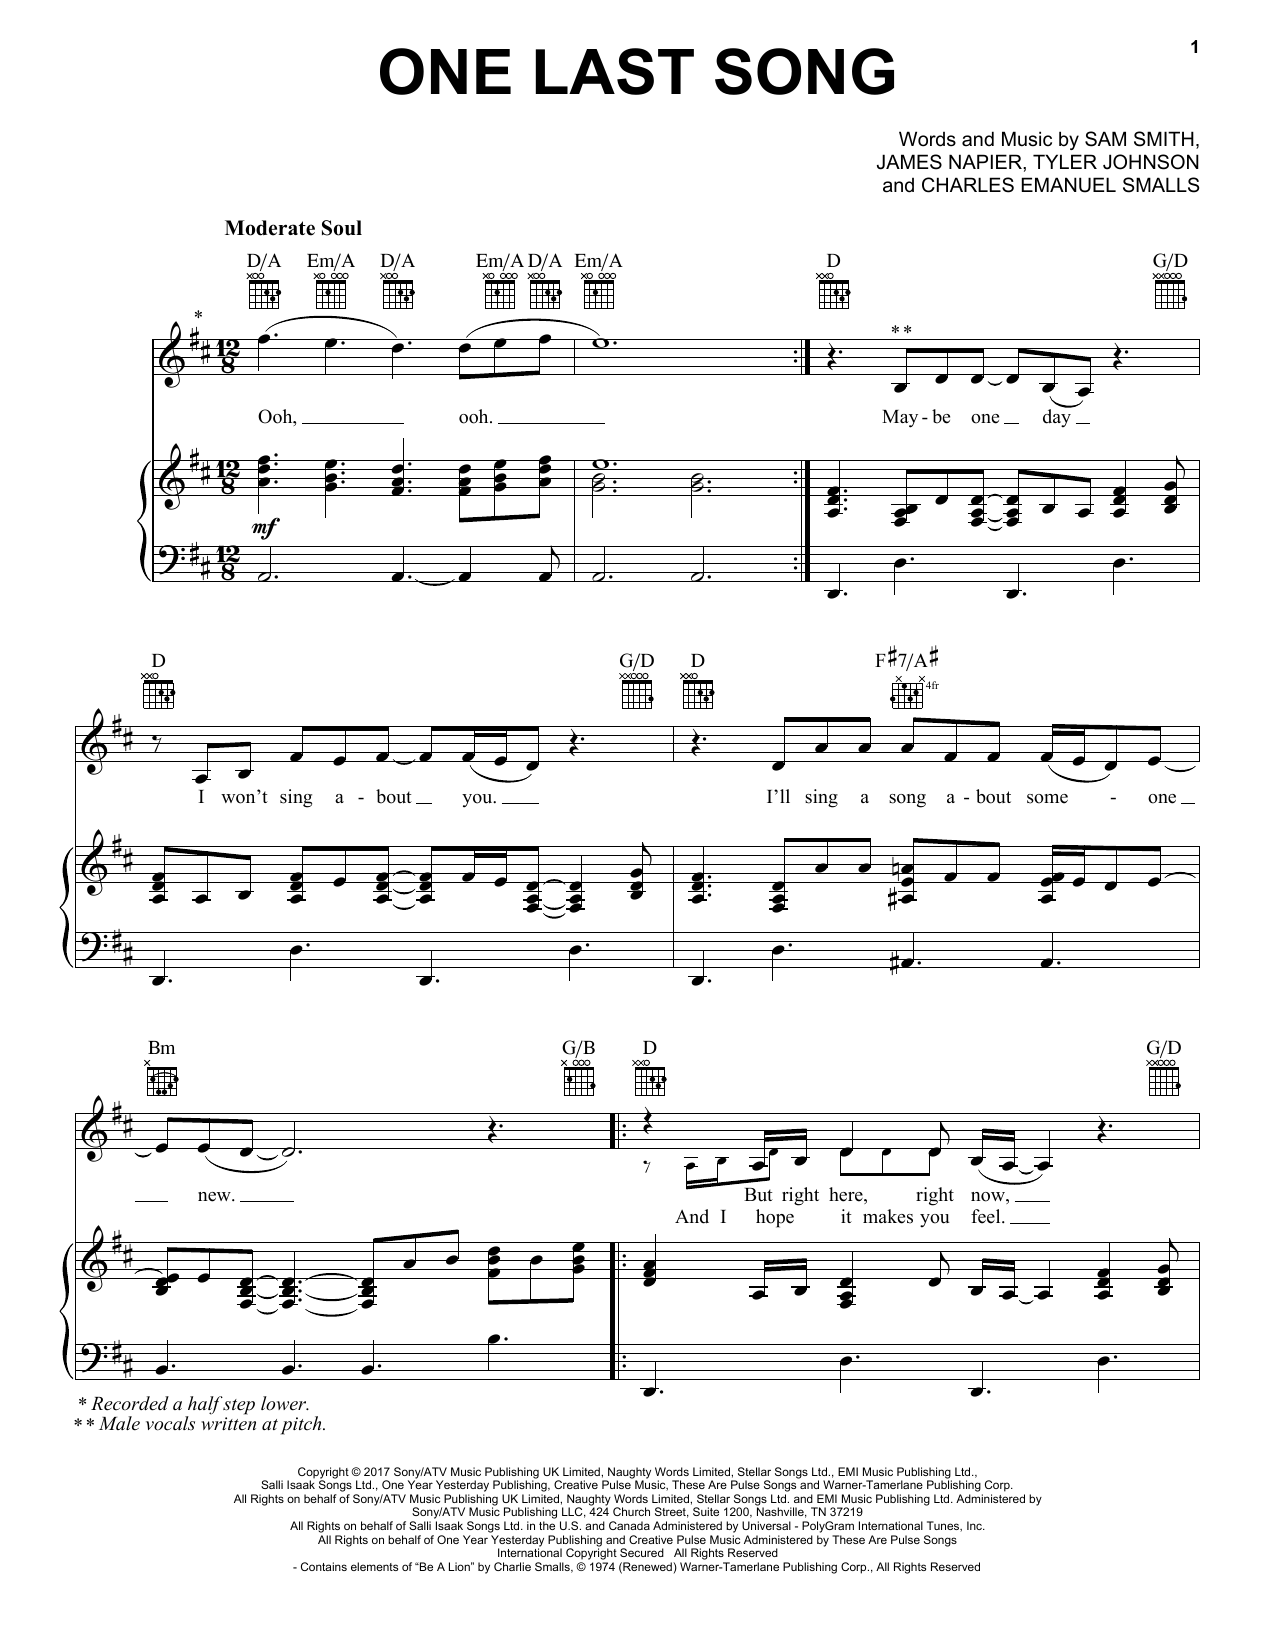 Download Sam Smith One Last Song Sheet Music